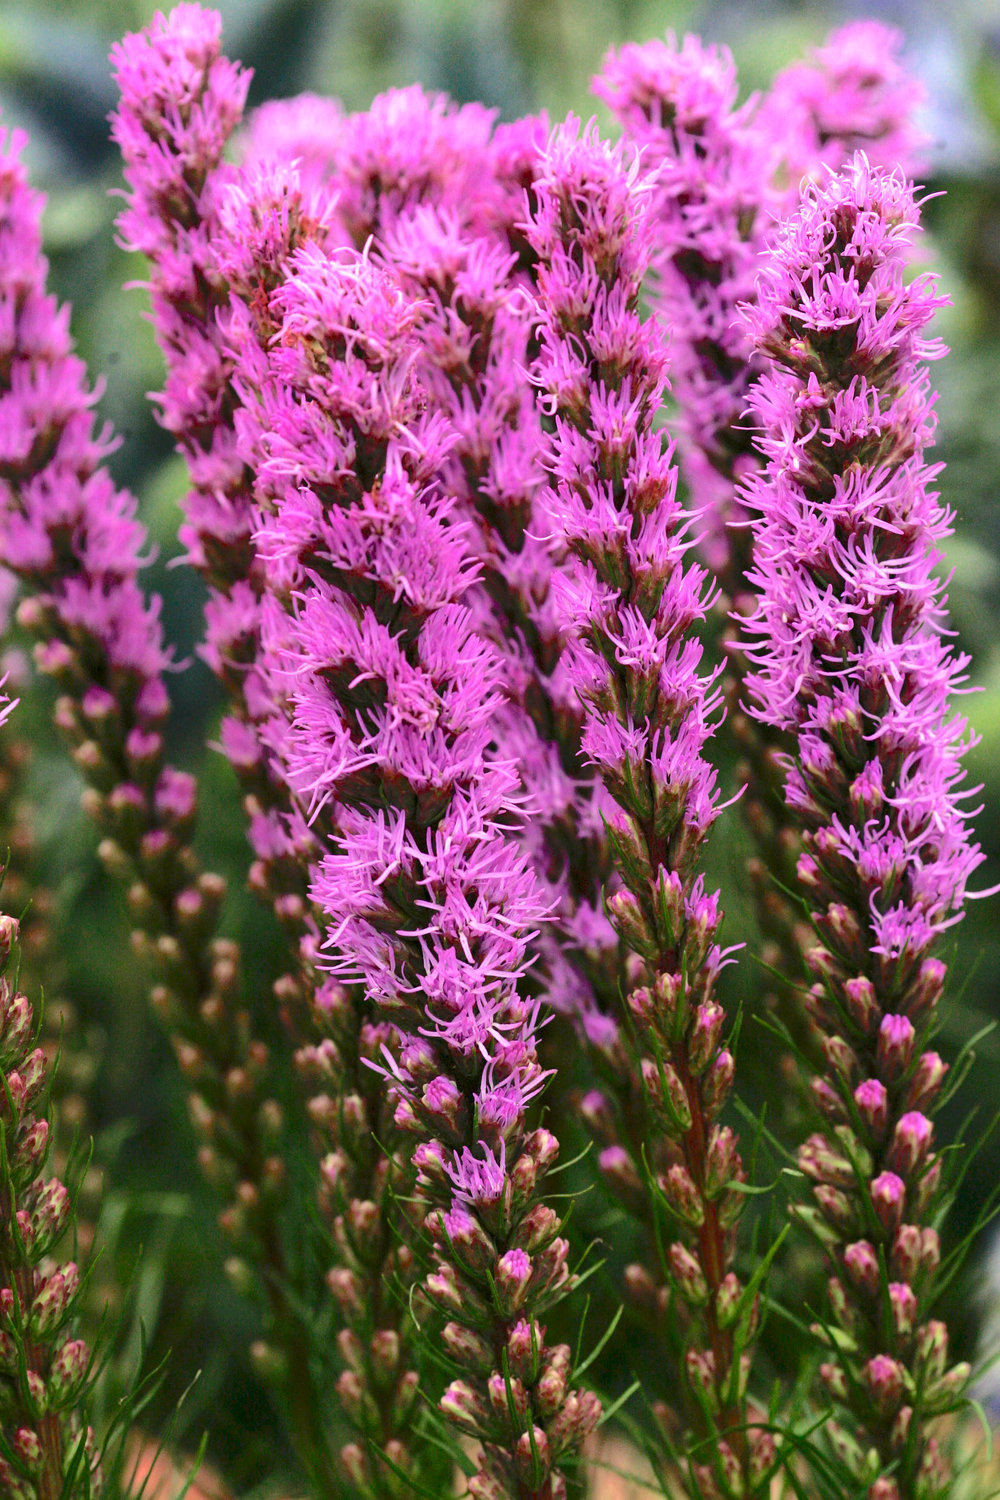 Liatris spicata is seen at Chelsea Flower Show in London. Instead of butterfly bushes, which are considered invasive, plant native summersweet (Clethra alnifolia) or blazing star (Liatris spicata).